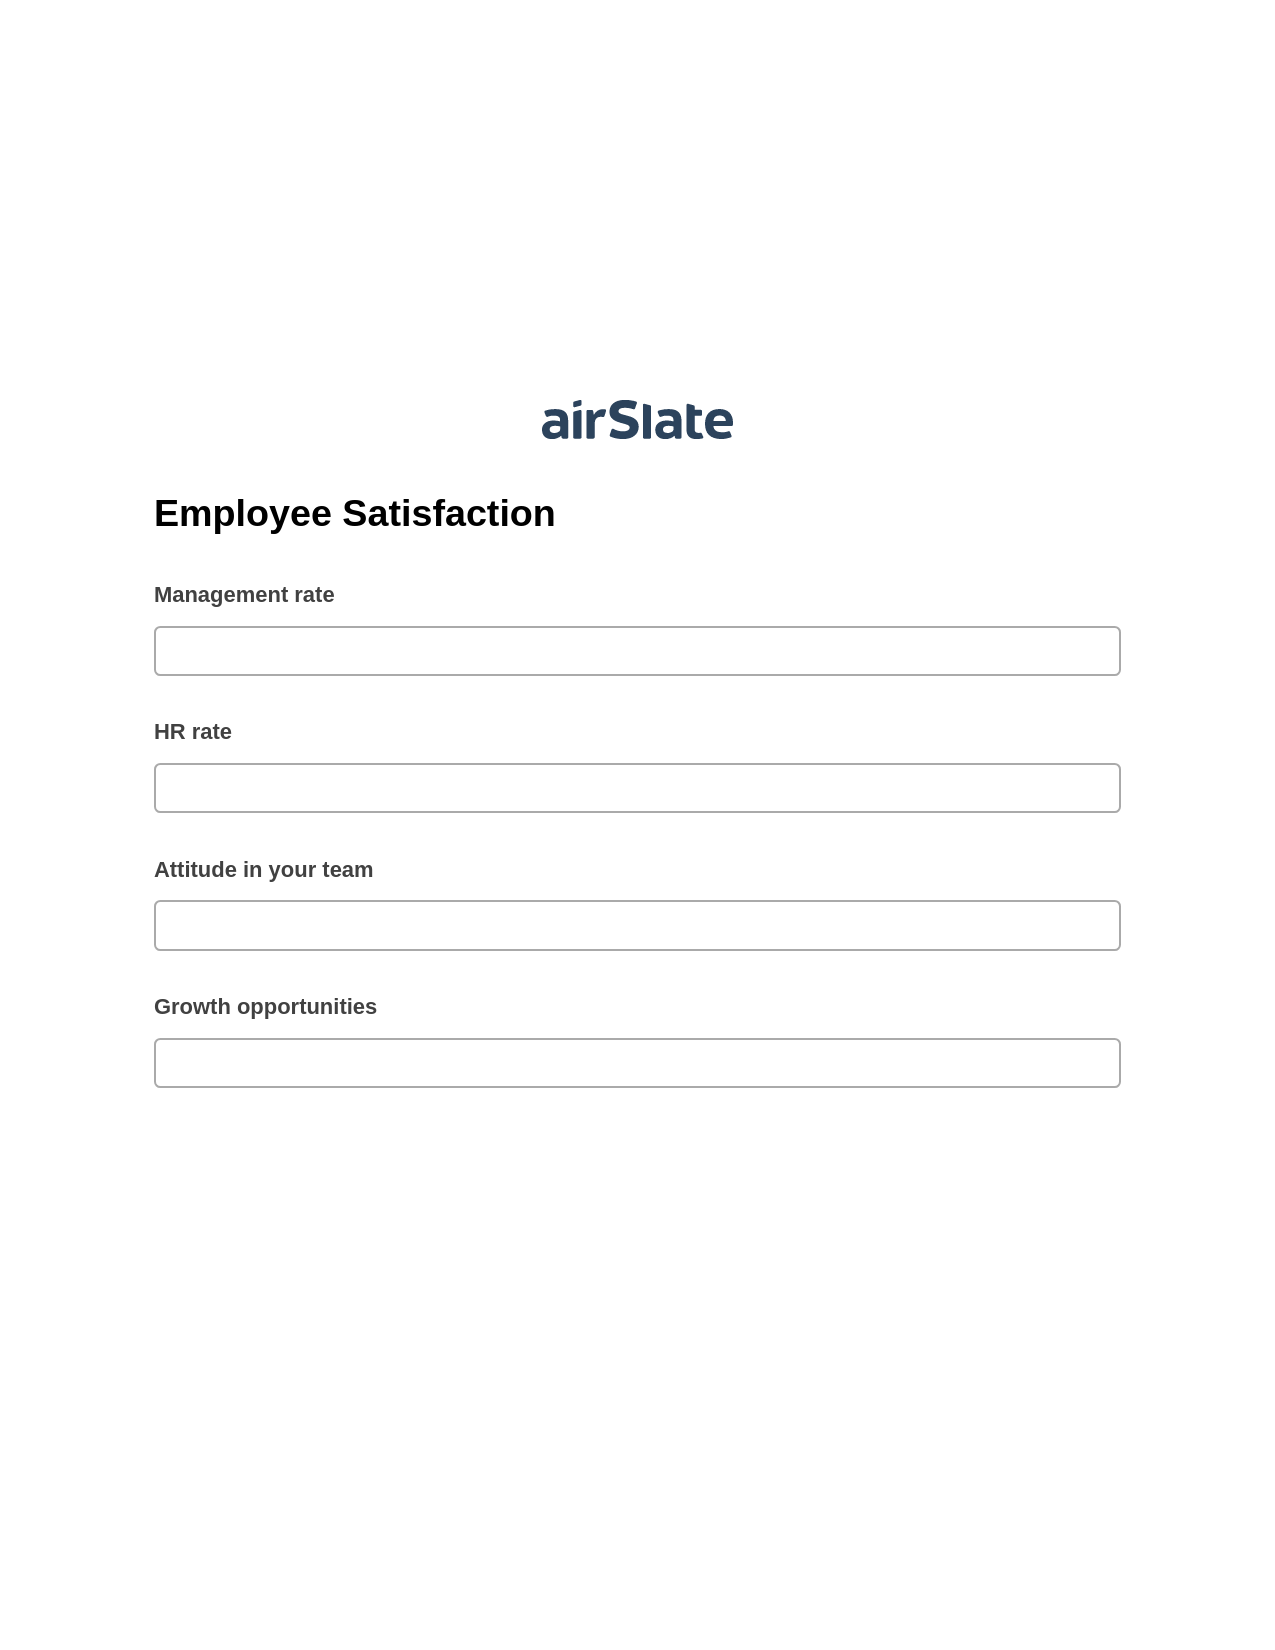 Employee Satisfaction Pre-fill from another Slate Bot, Remove Slate Bot, Google Drive Bot